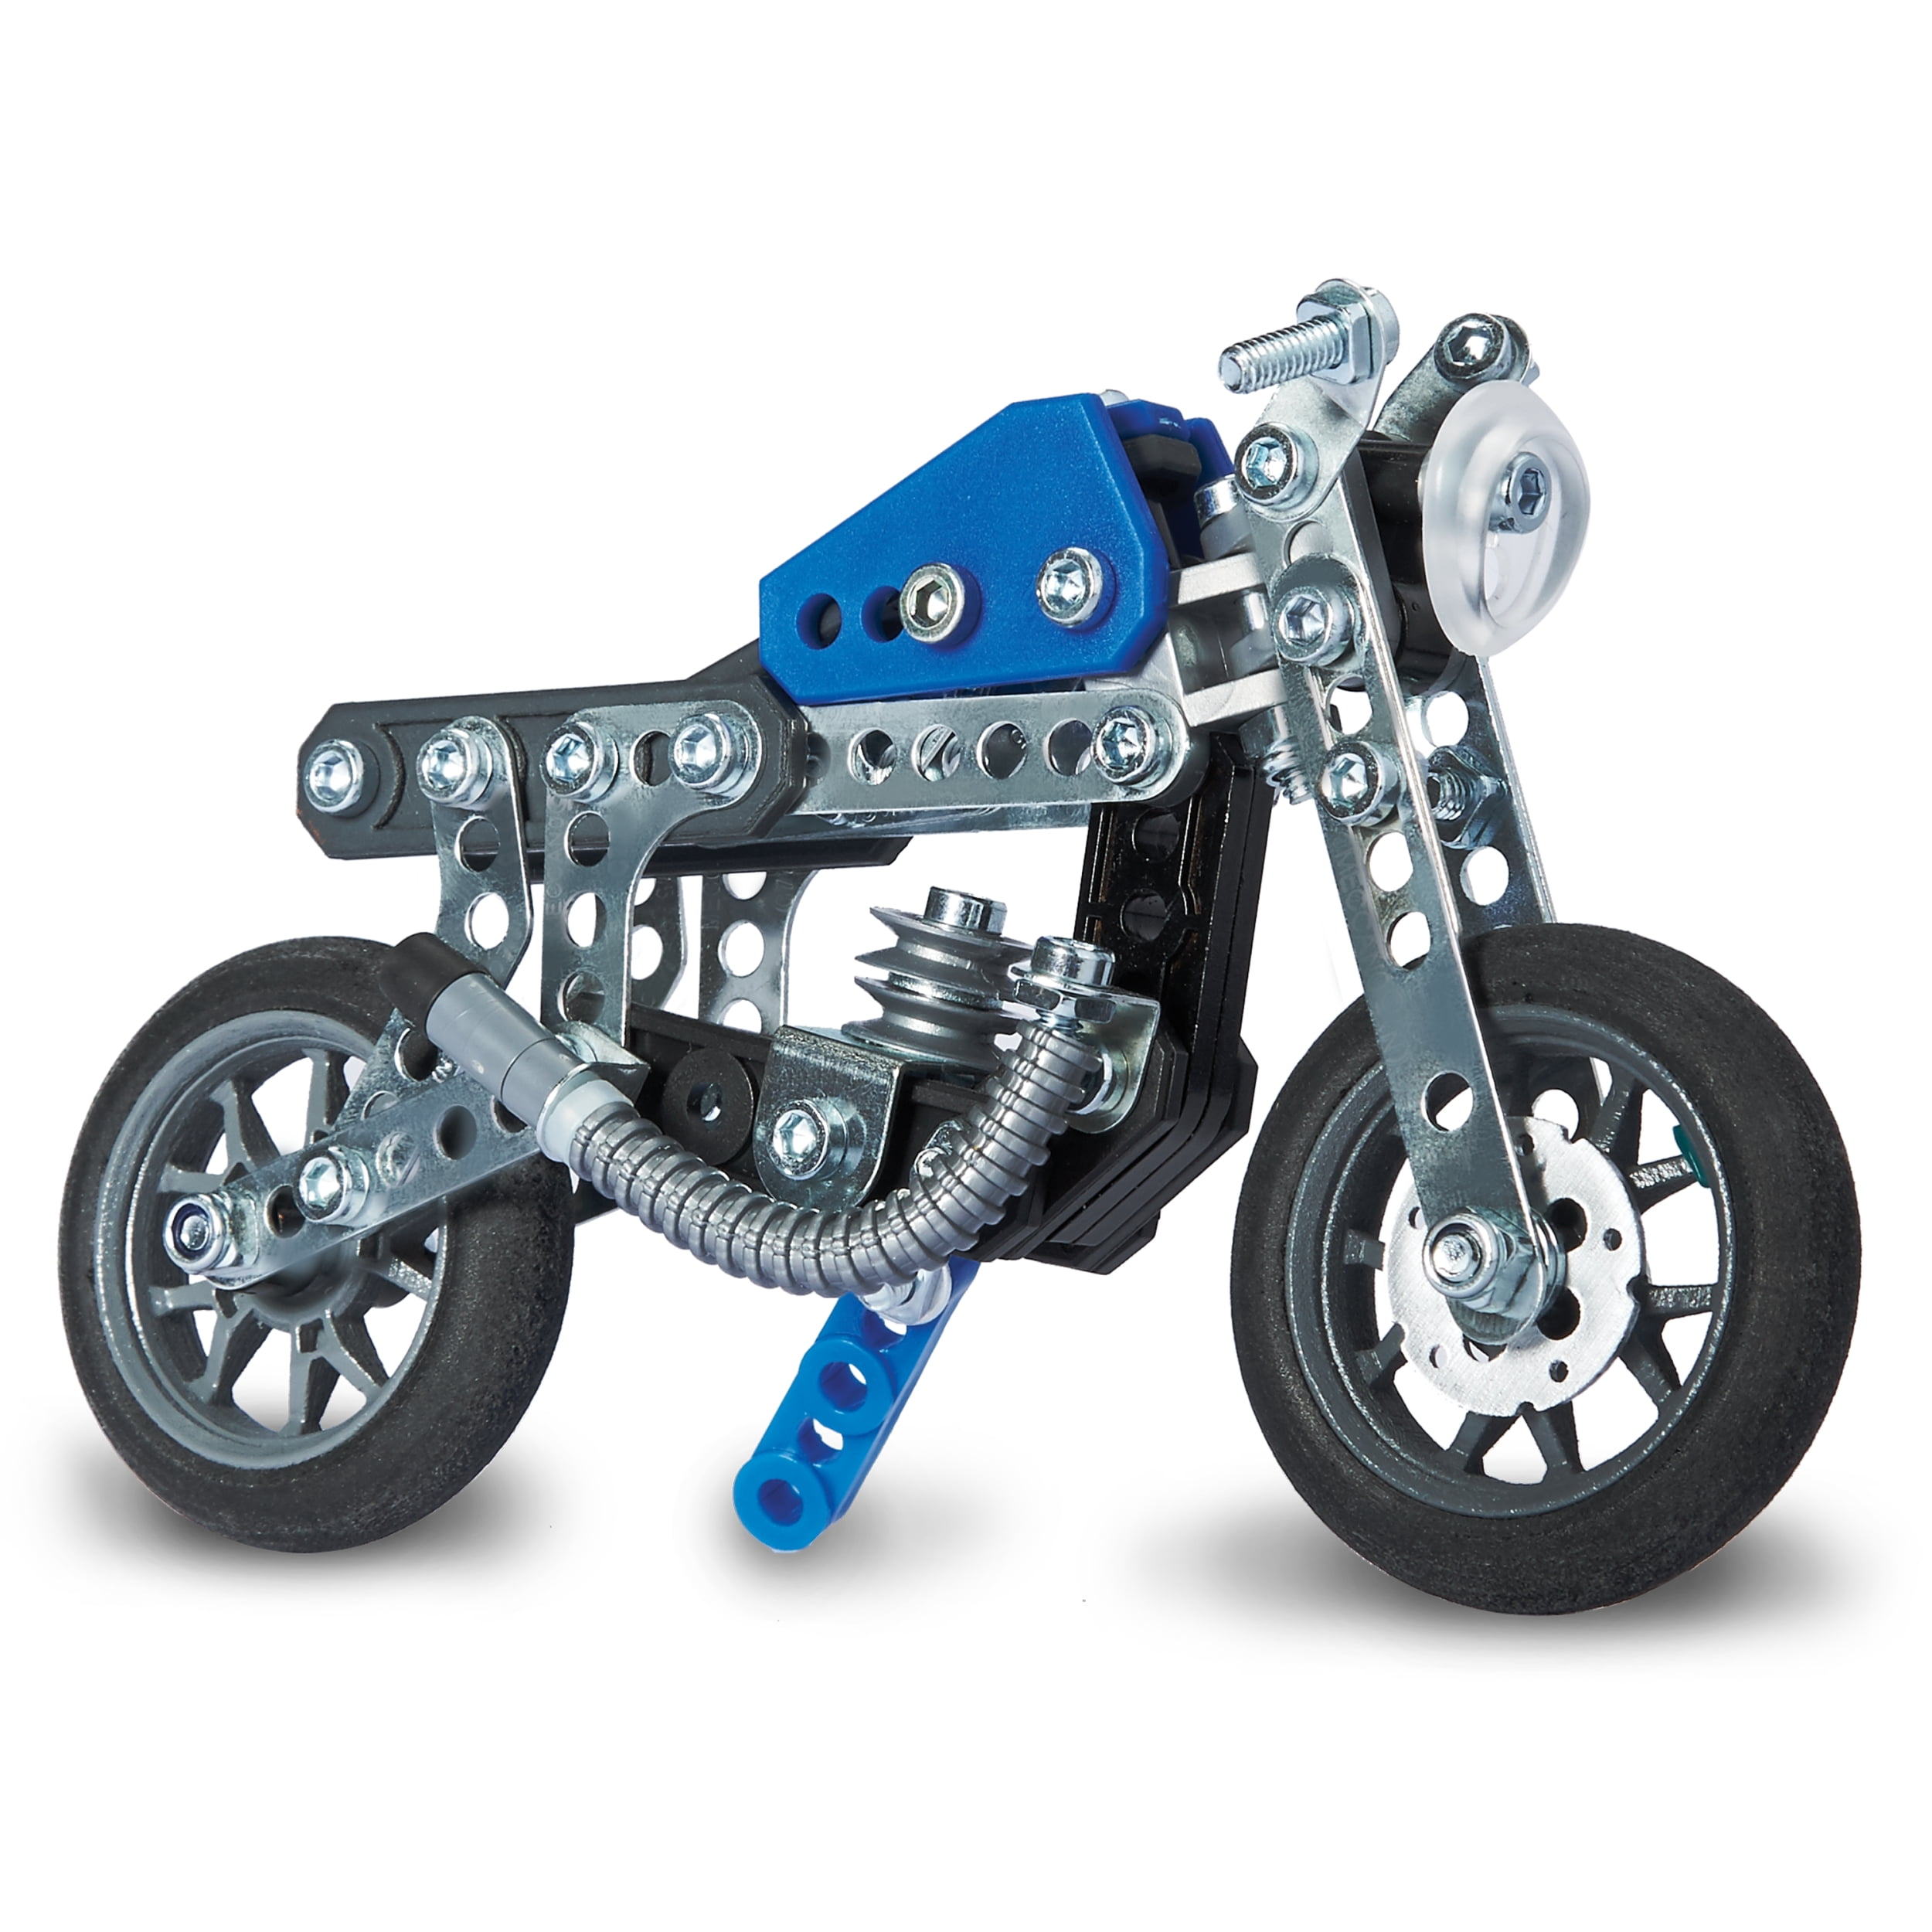 Meccano by Erector, 5 in 1 Model Building Set - Motorcycles, STEM